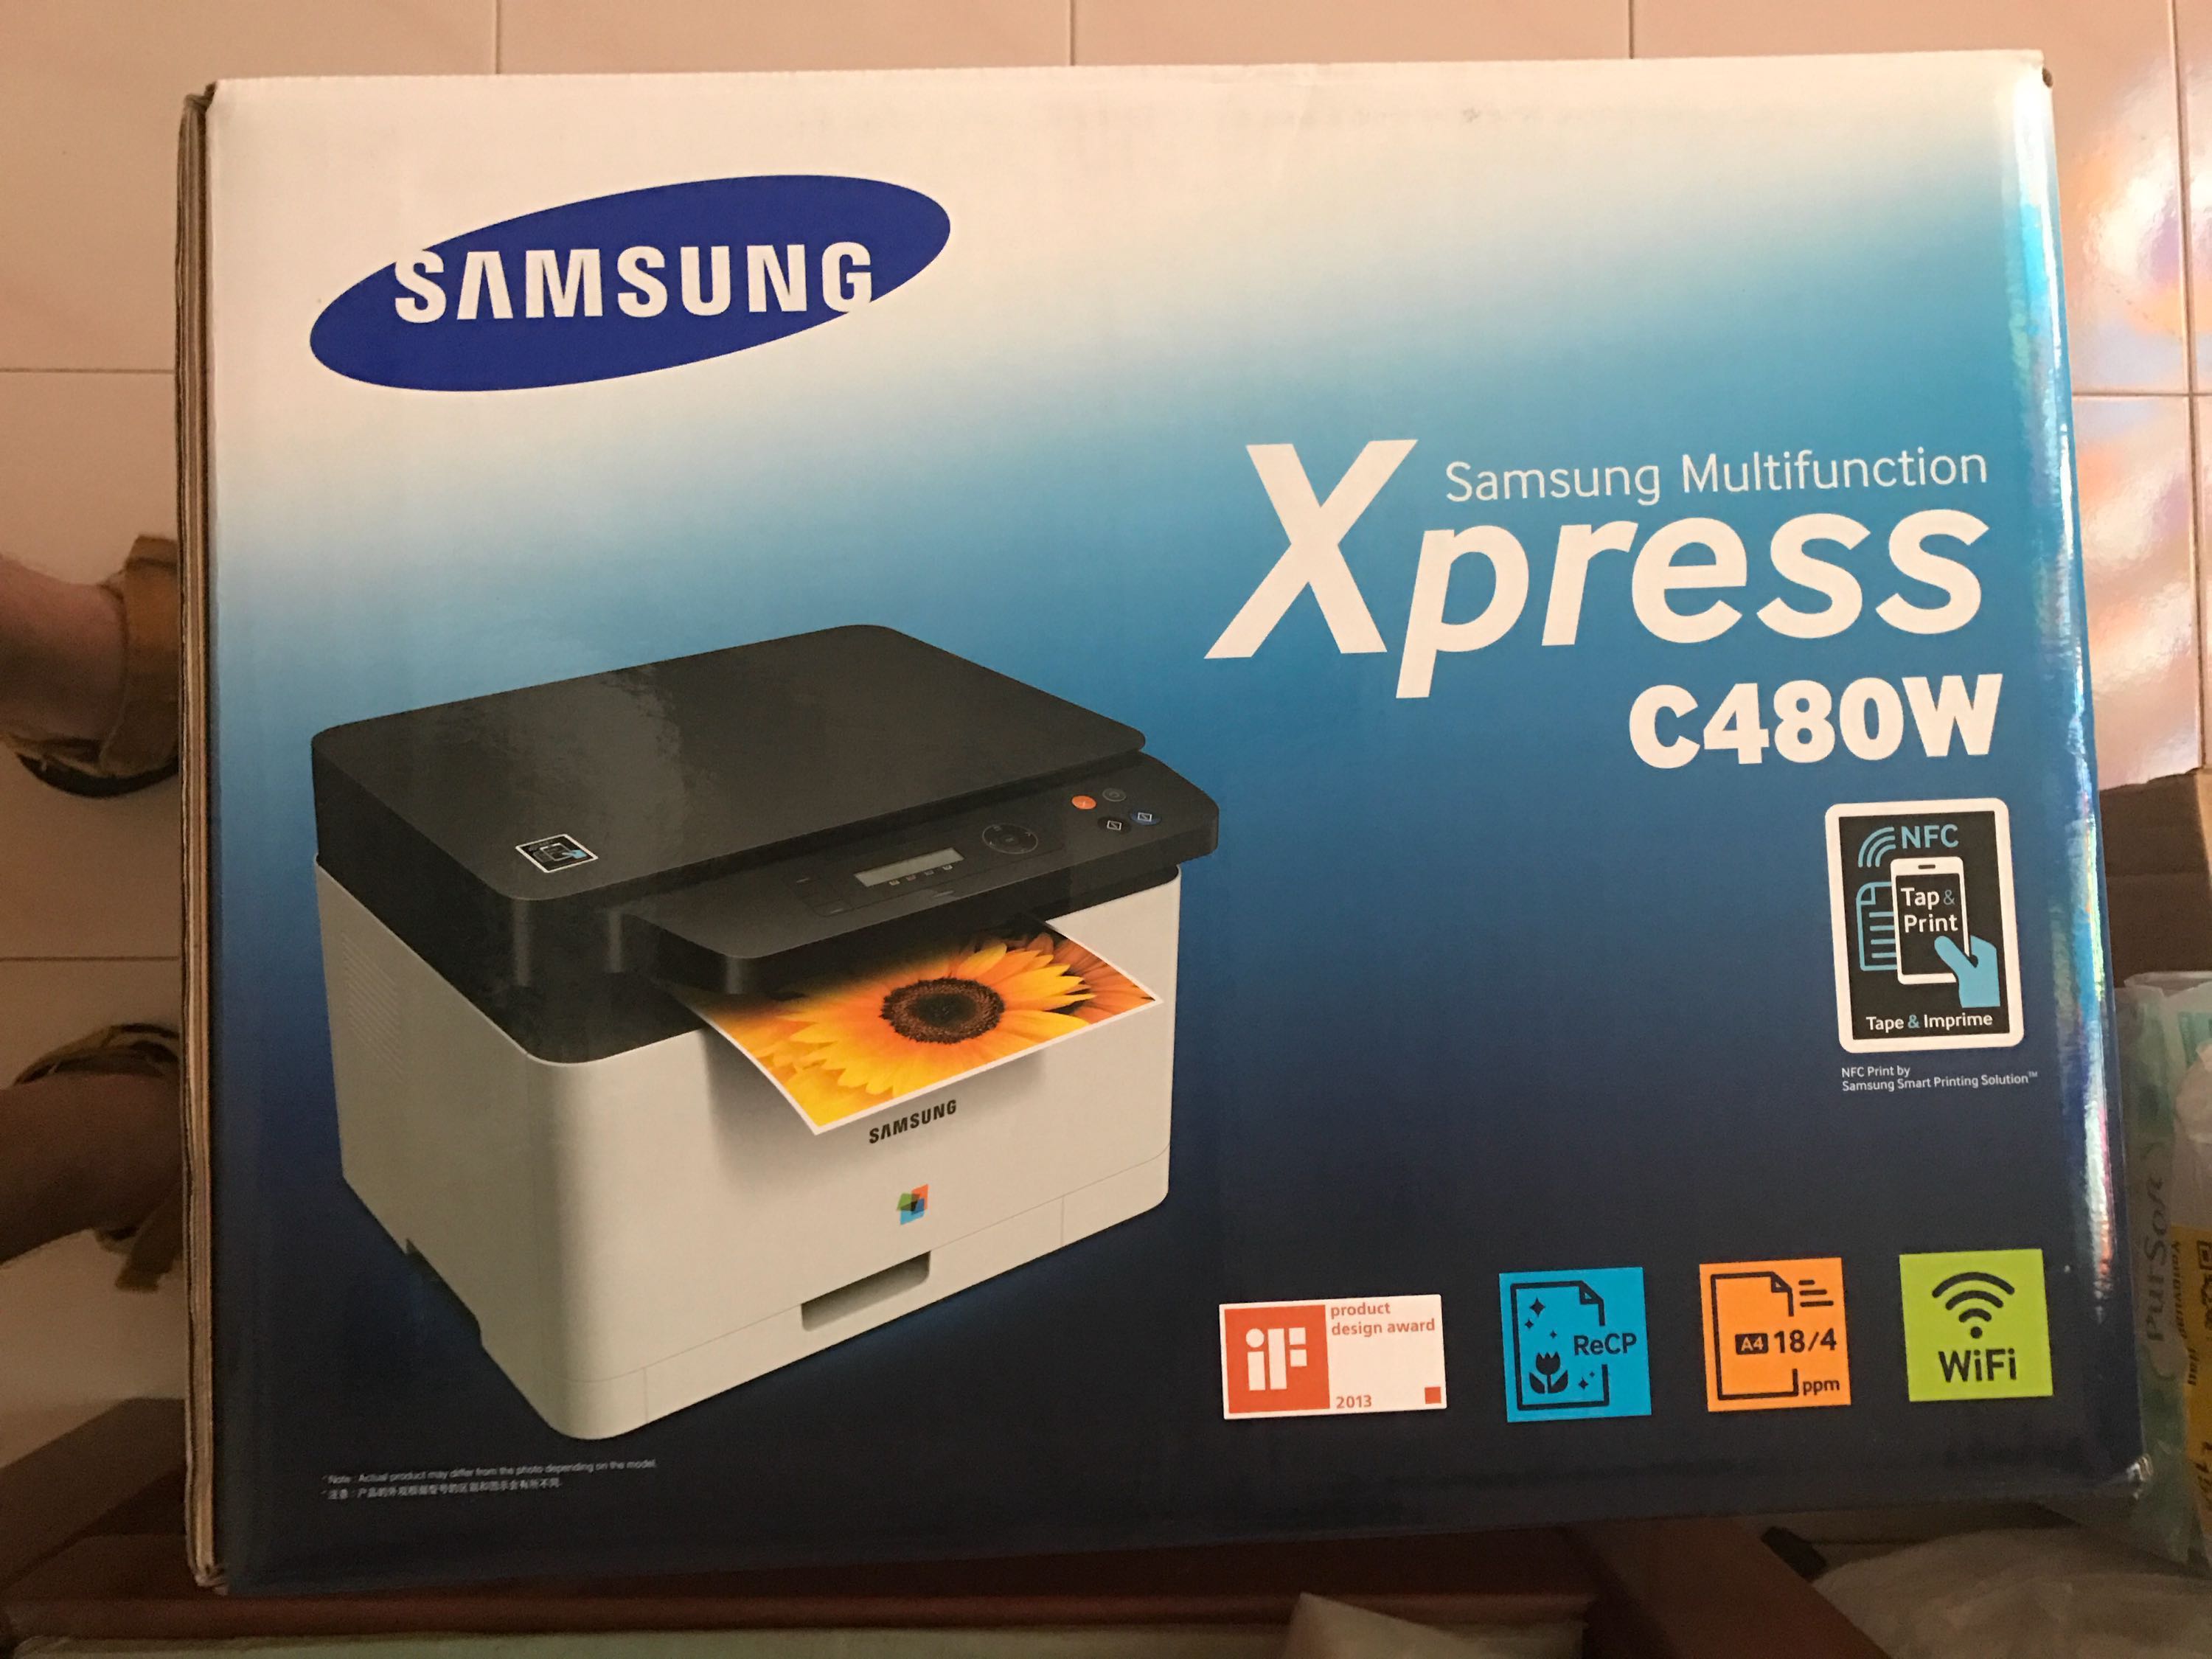 xpress Computers & Printers, Scanners Copiers on Carousell